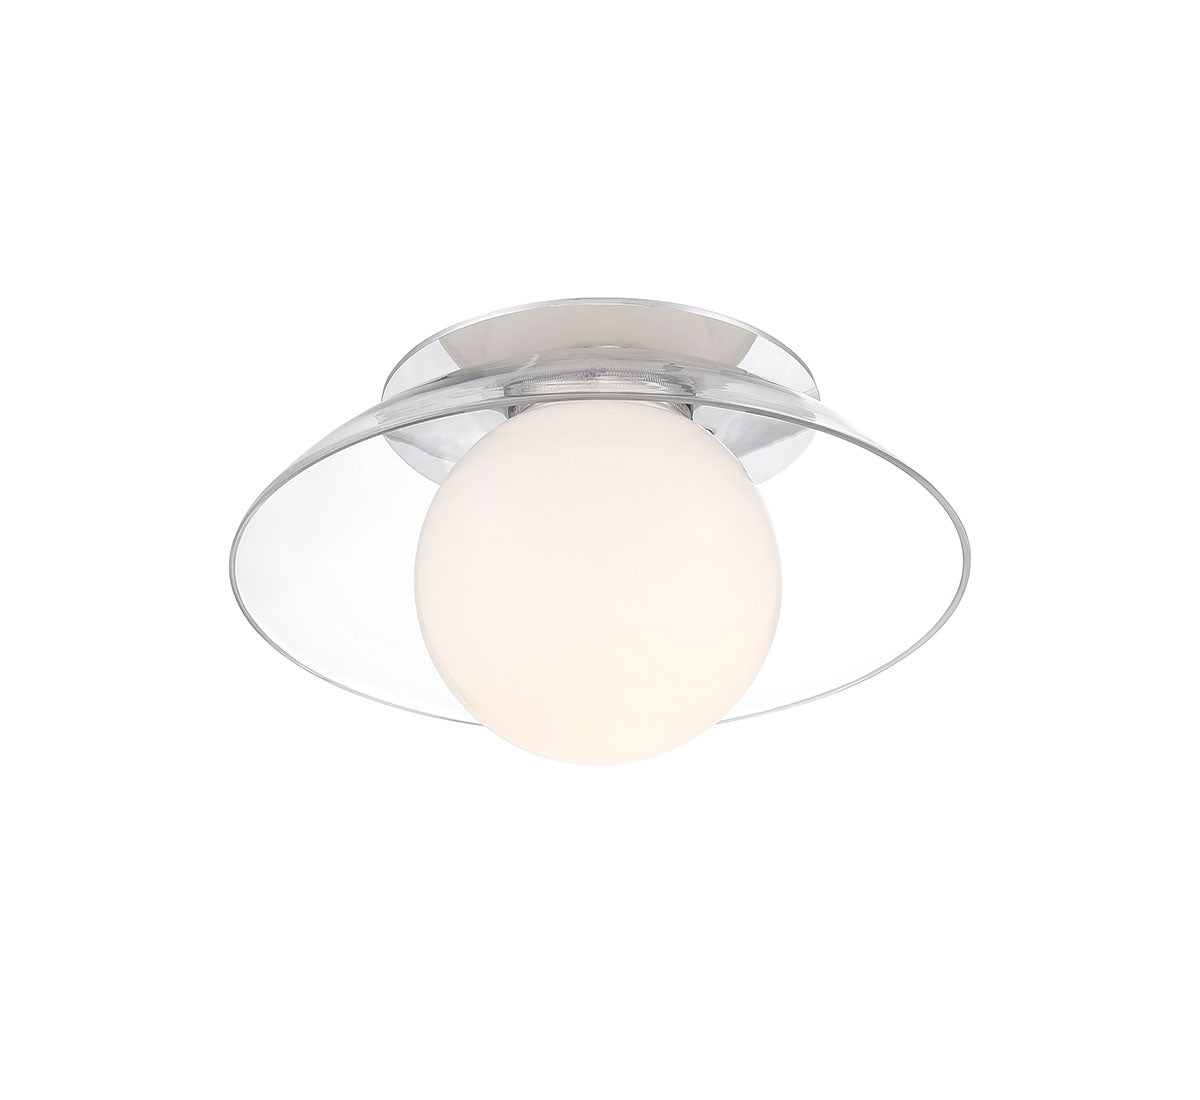 ANCONA 10125-01, Small 1 Light Ceiling / Wall Mount